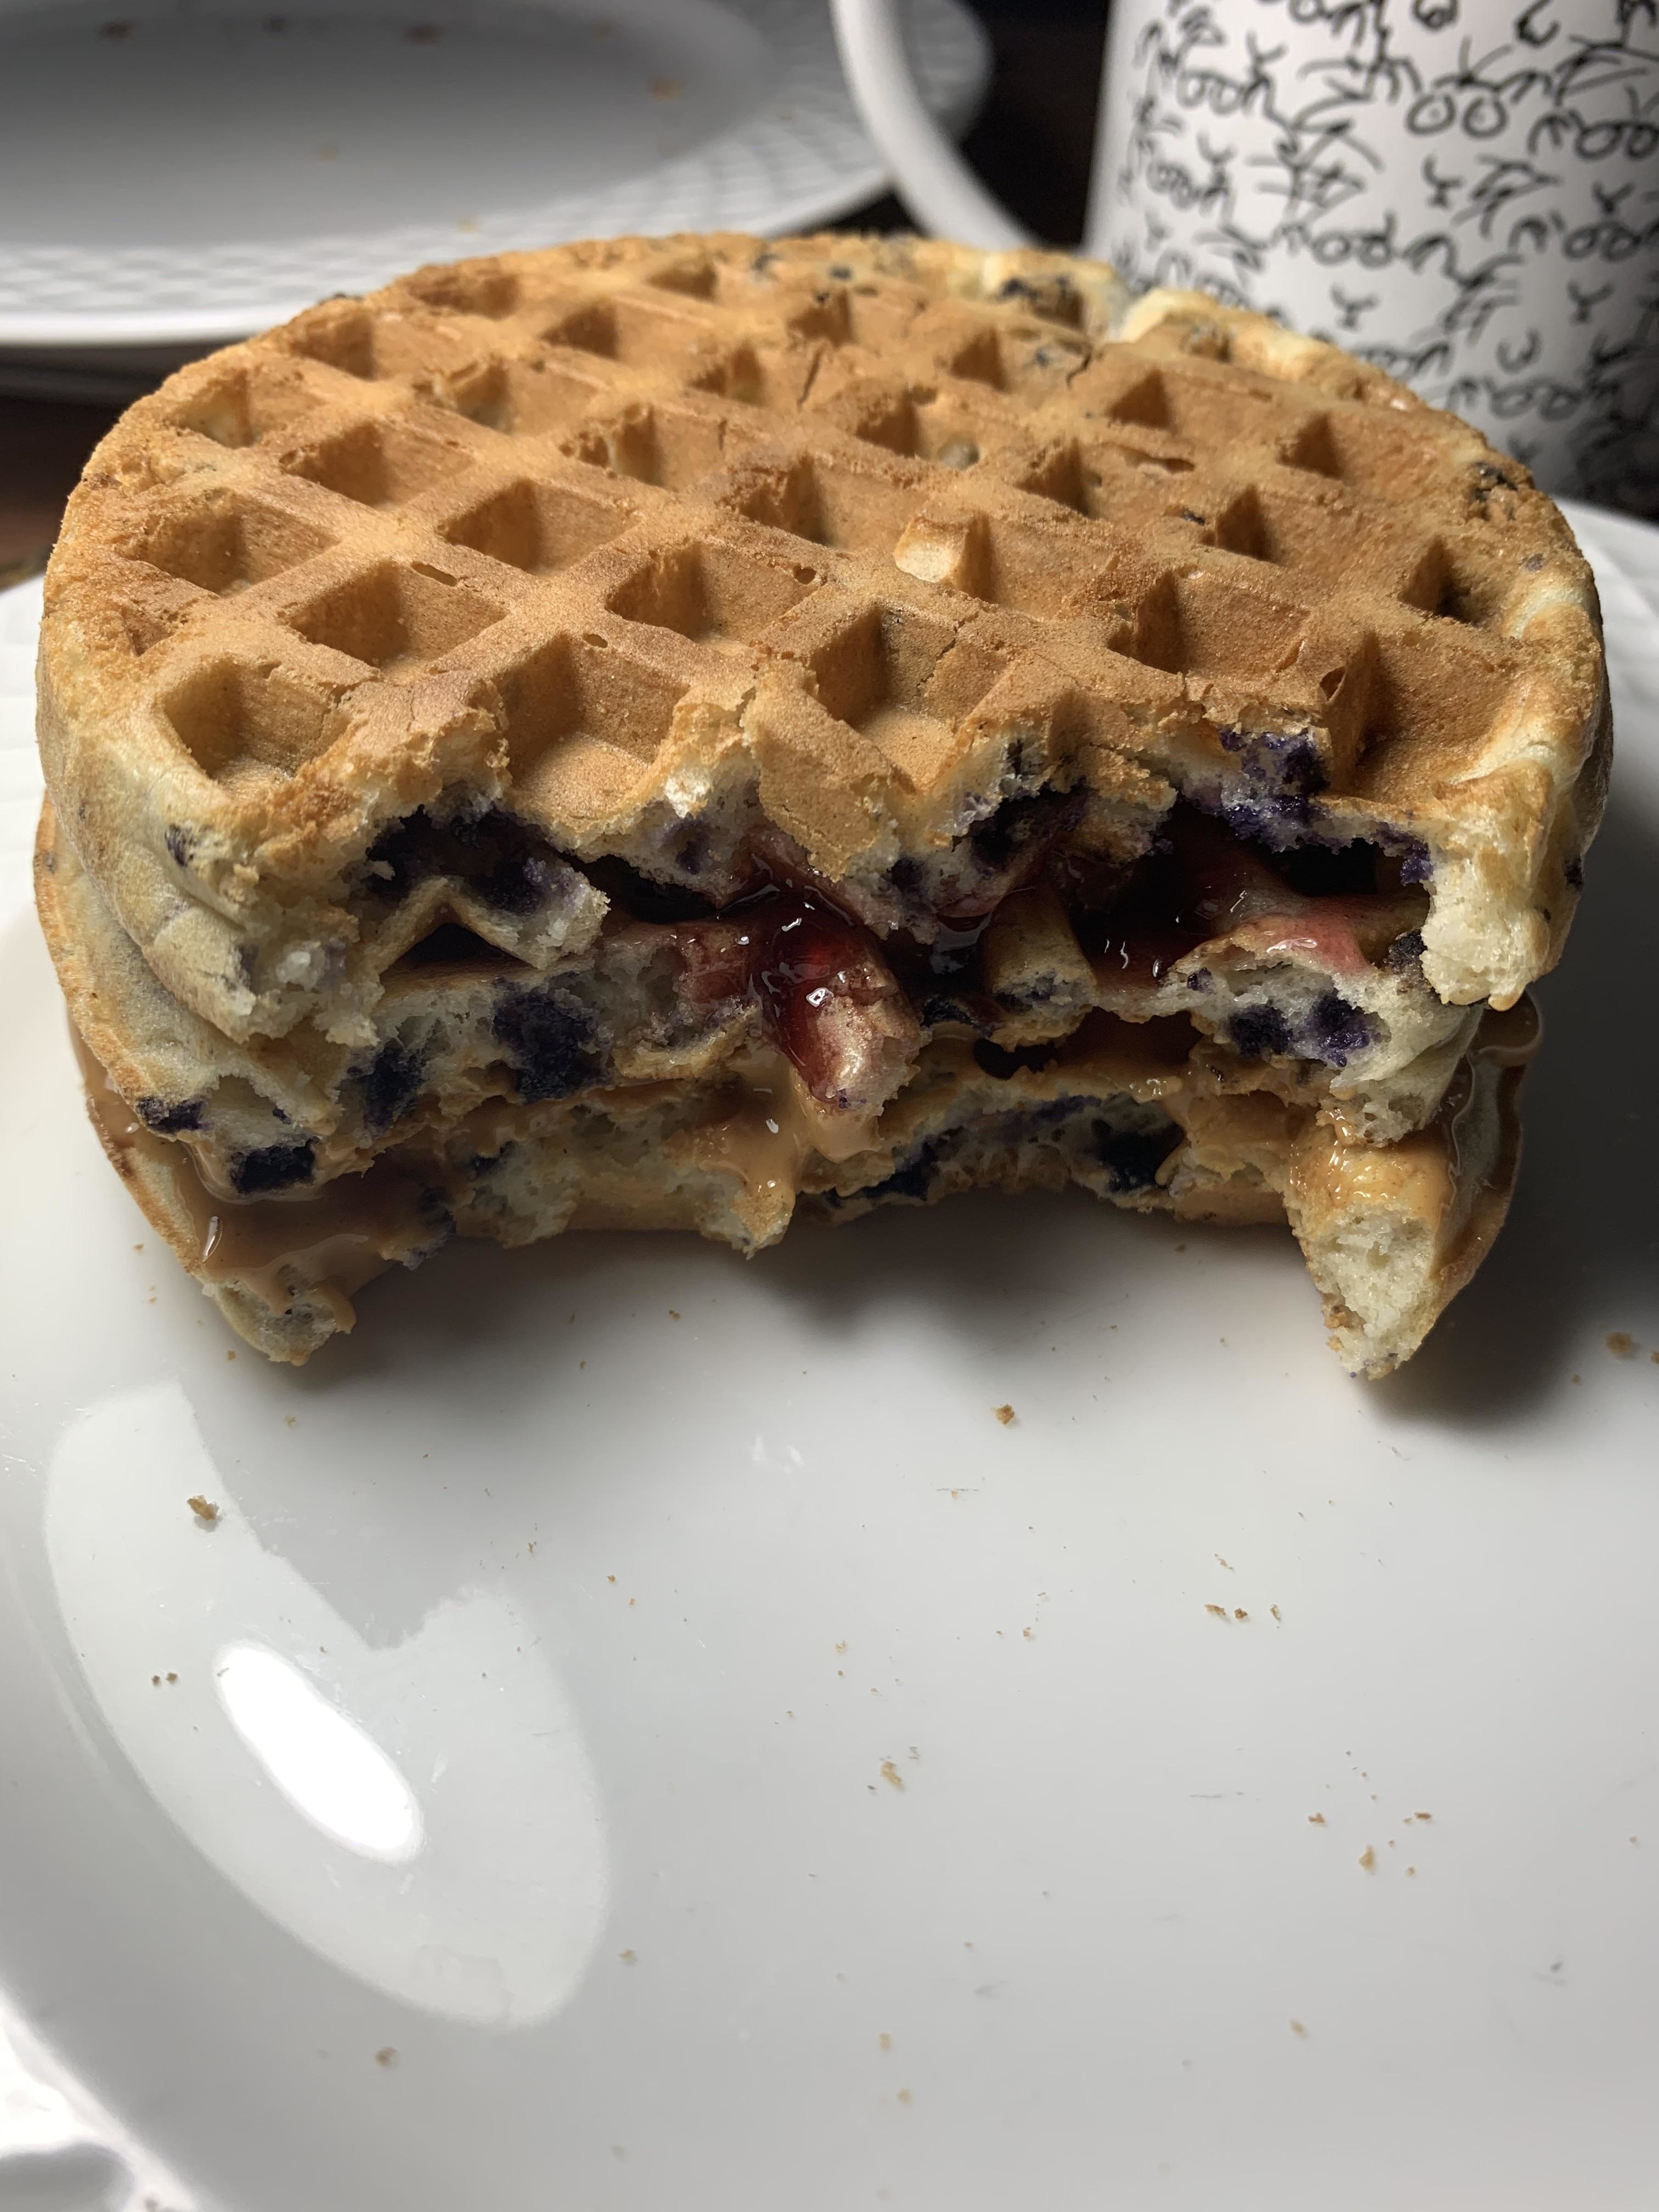 A half-eaten blueberry waffle sandwich with peanut butter and jelly on a white plate